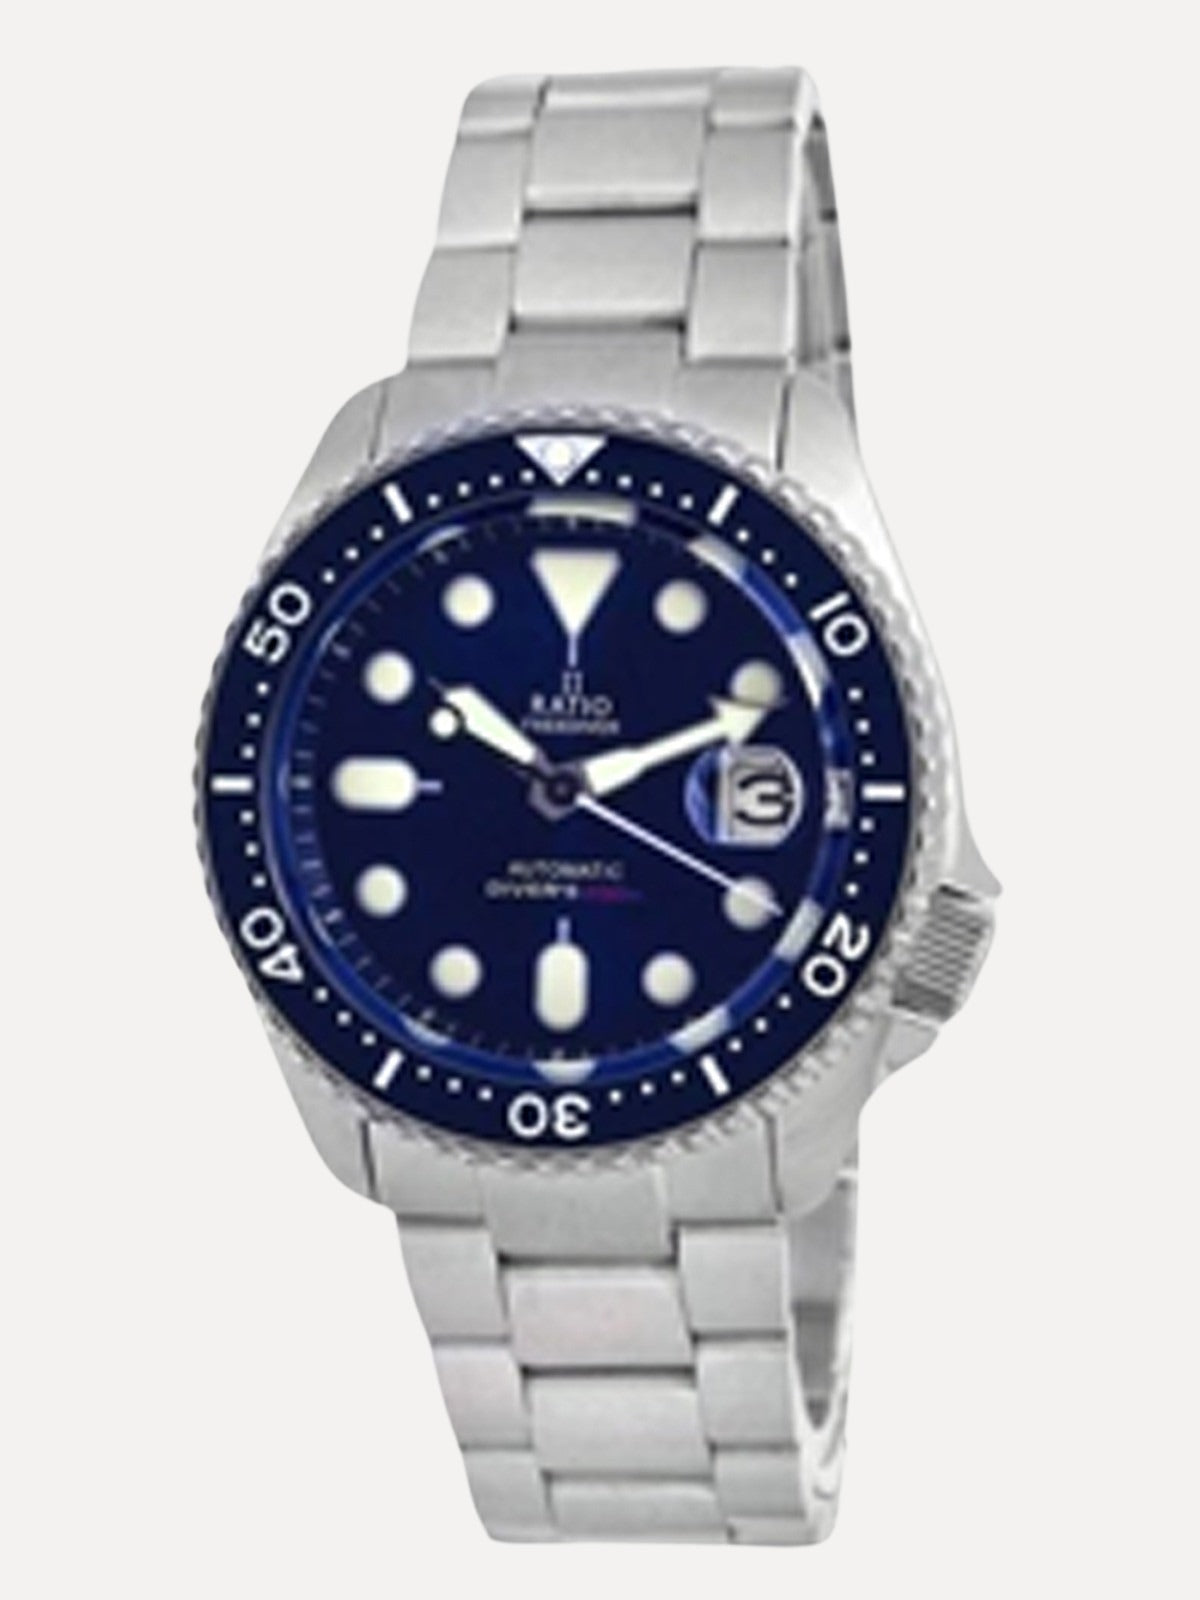 Ratio FreeDiver Blue Dial Sapphire Crystal Stainless Steel Automatic RTB202 200M Mens Watch